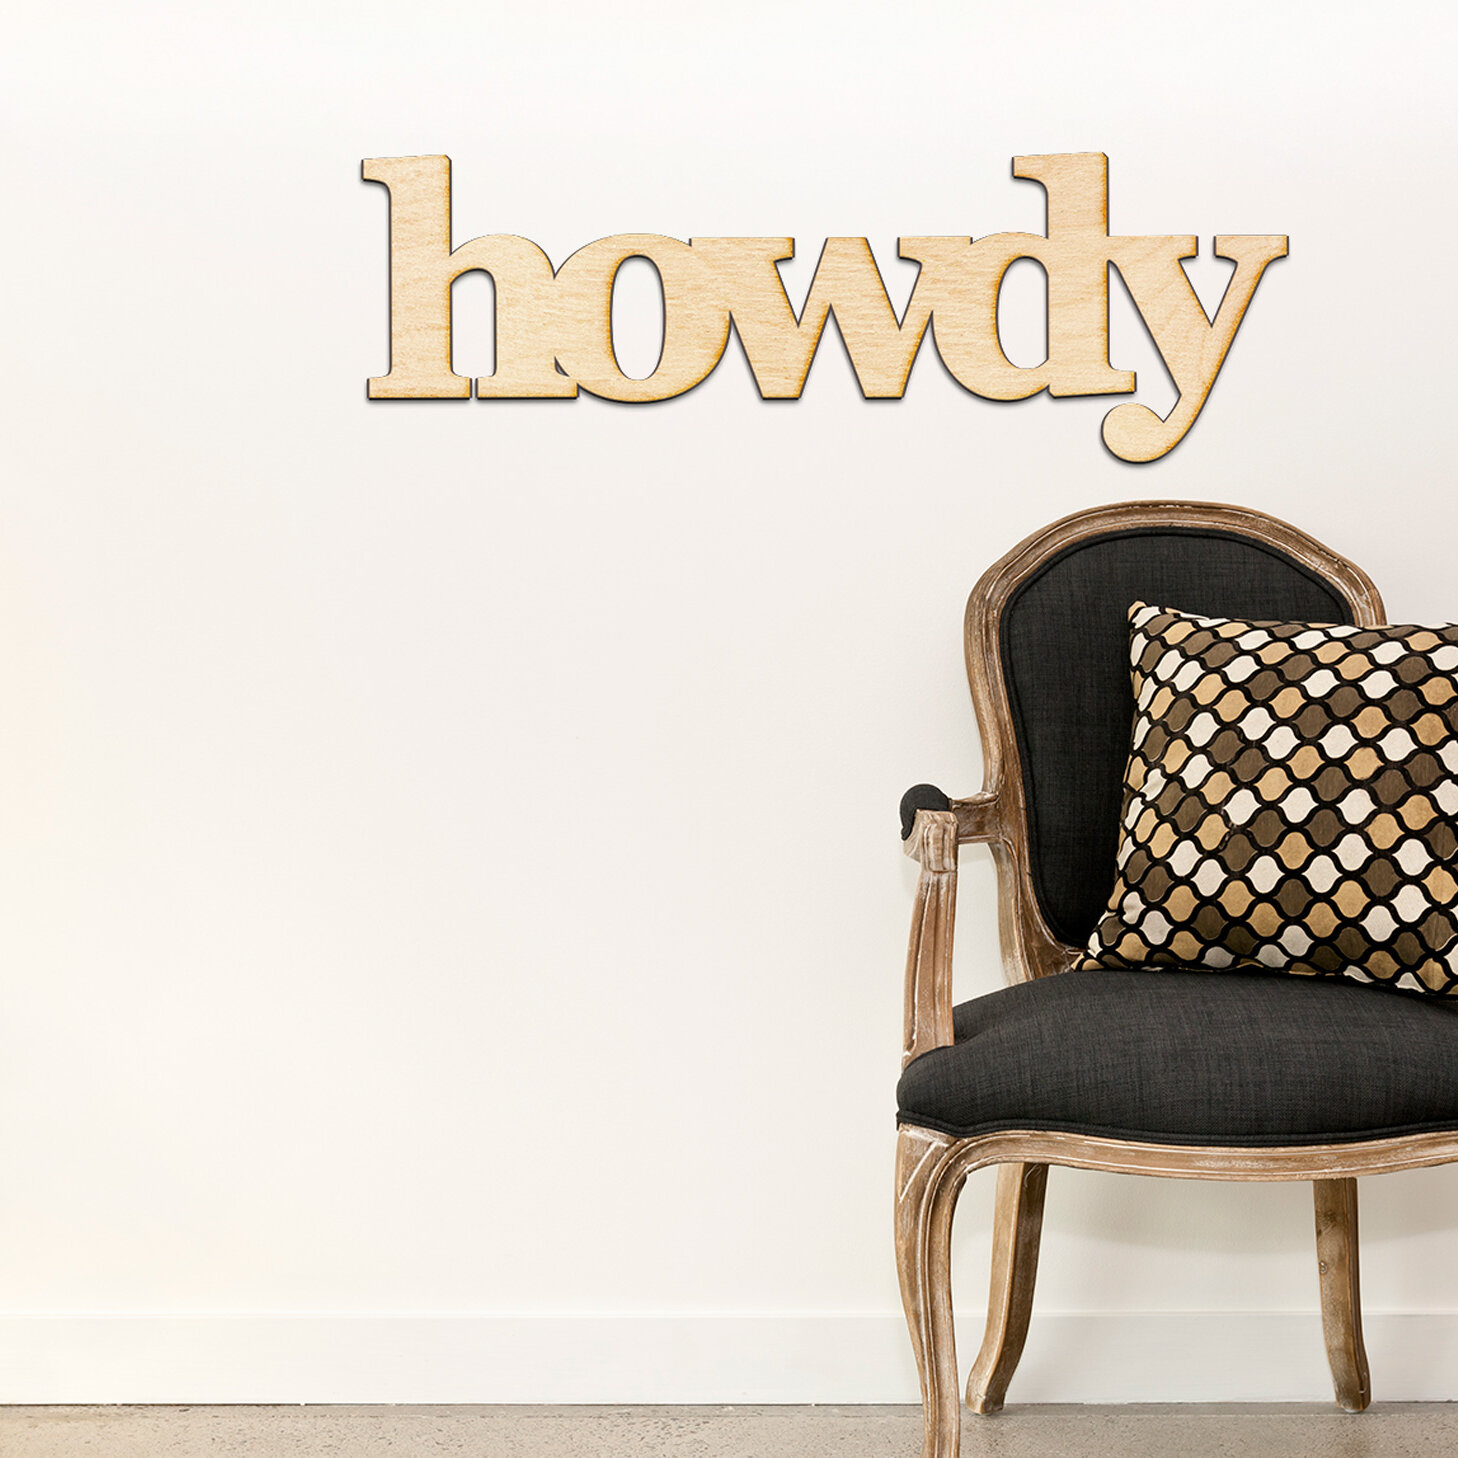 Millwood Pines Howdy Serif Block Font Wood Sign Home Gallery Wall